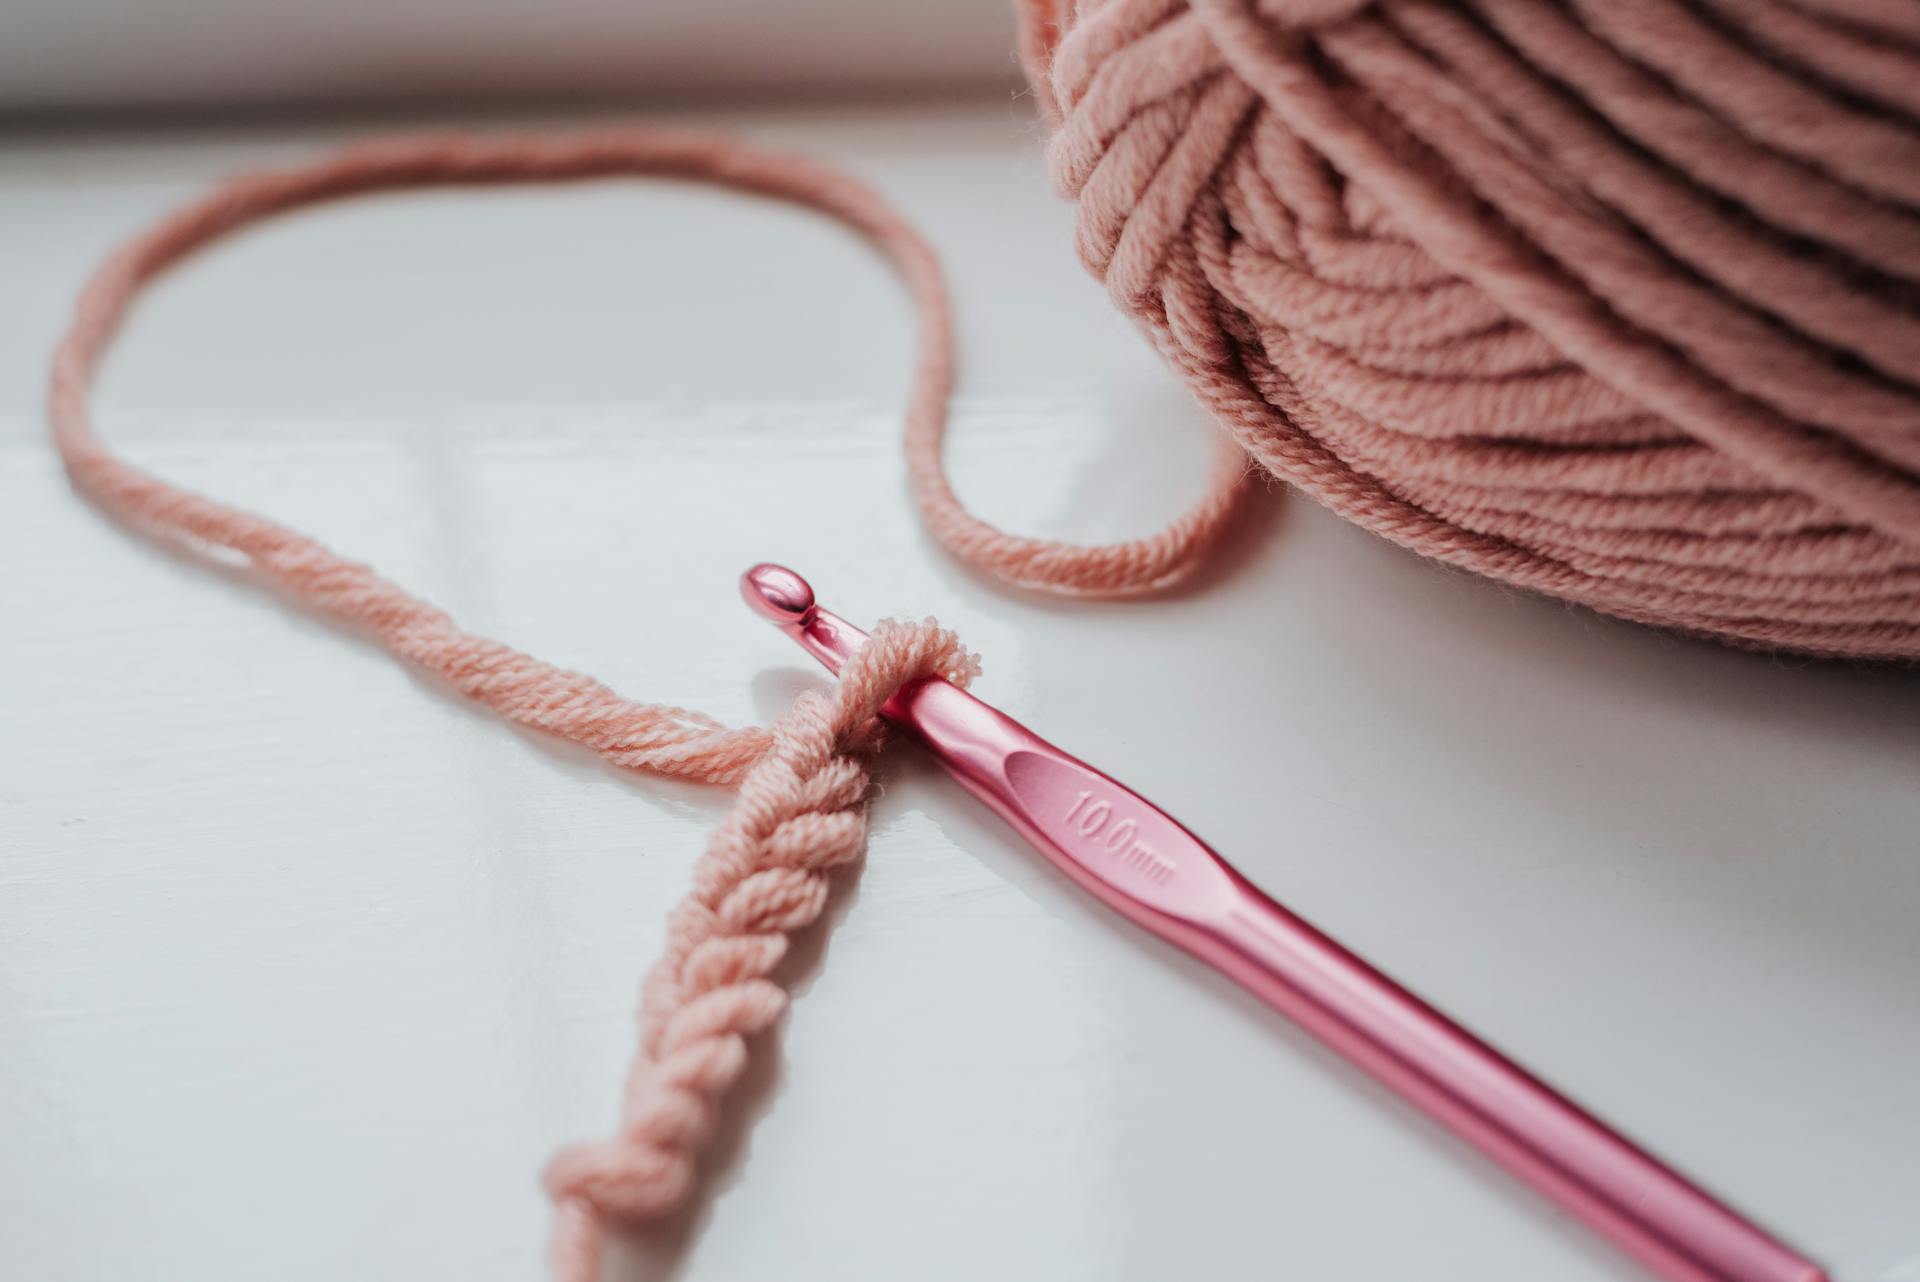 A knitted piece and yarn with hook | Source: Pexels